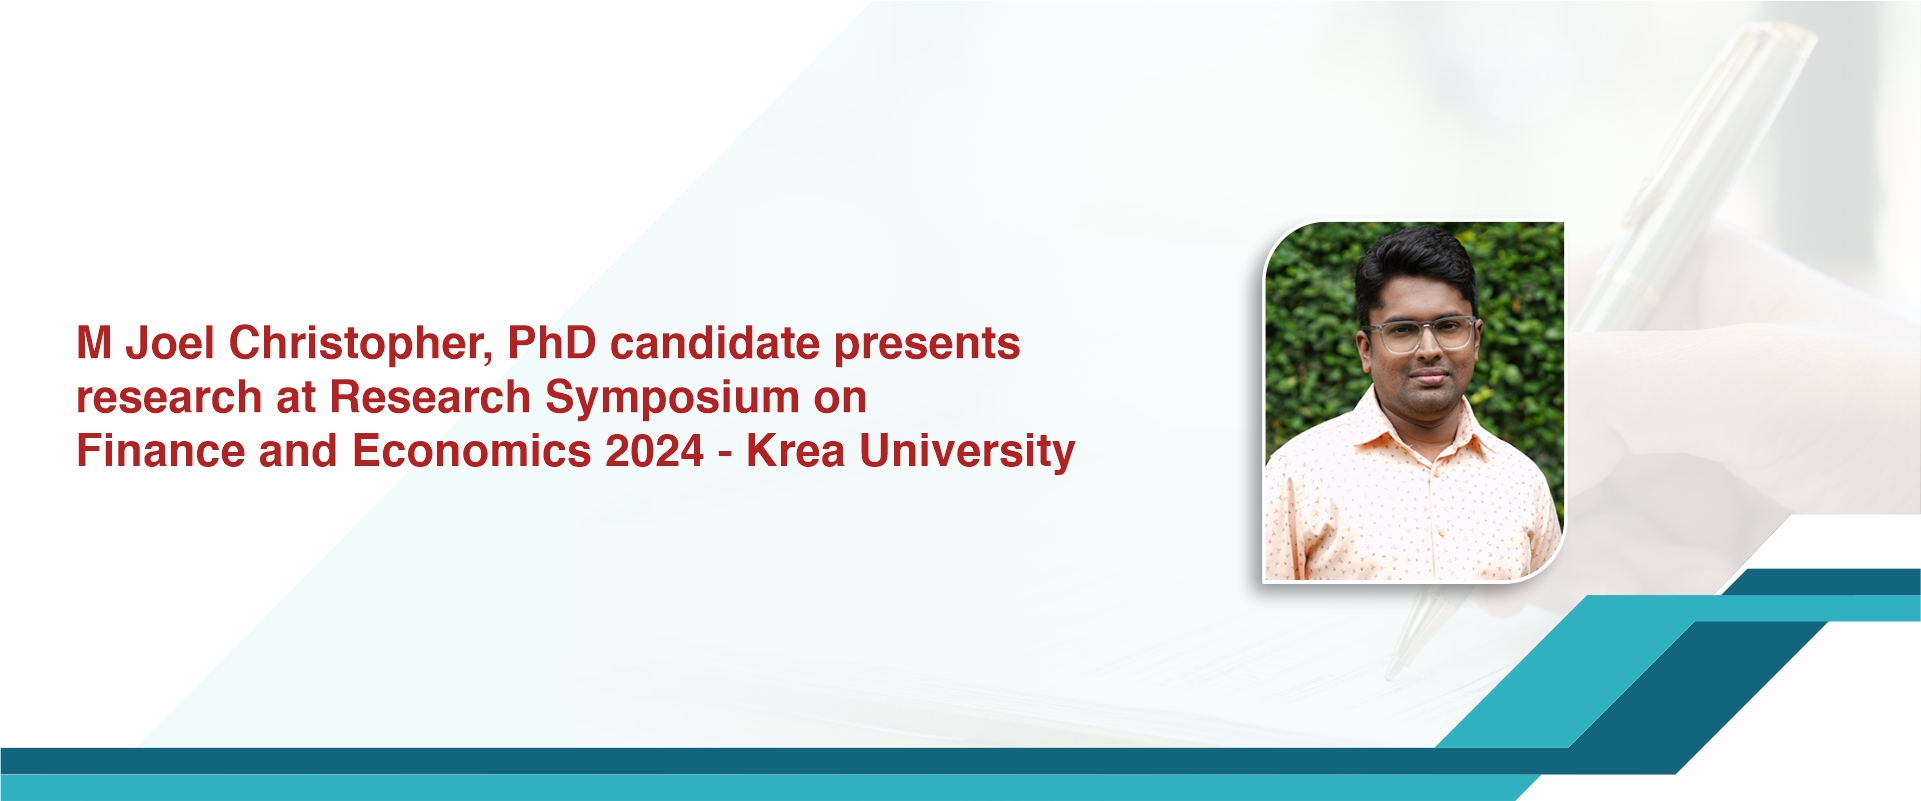 M Joel Christopher, PhD candidate presents research at Research Symposium on Finance and Economics 2024 - Krea University